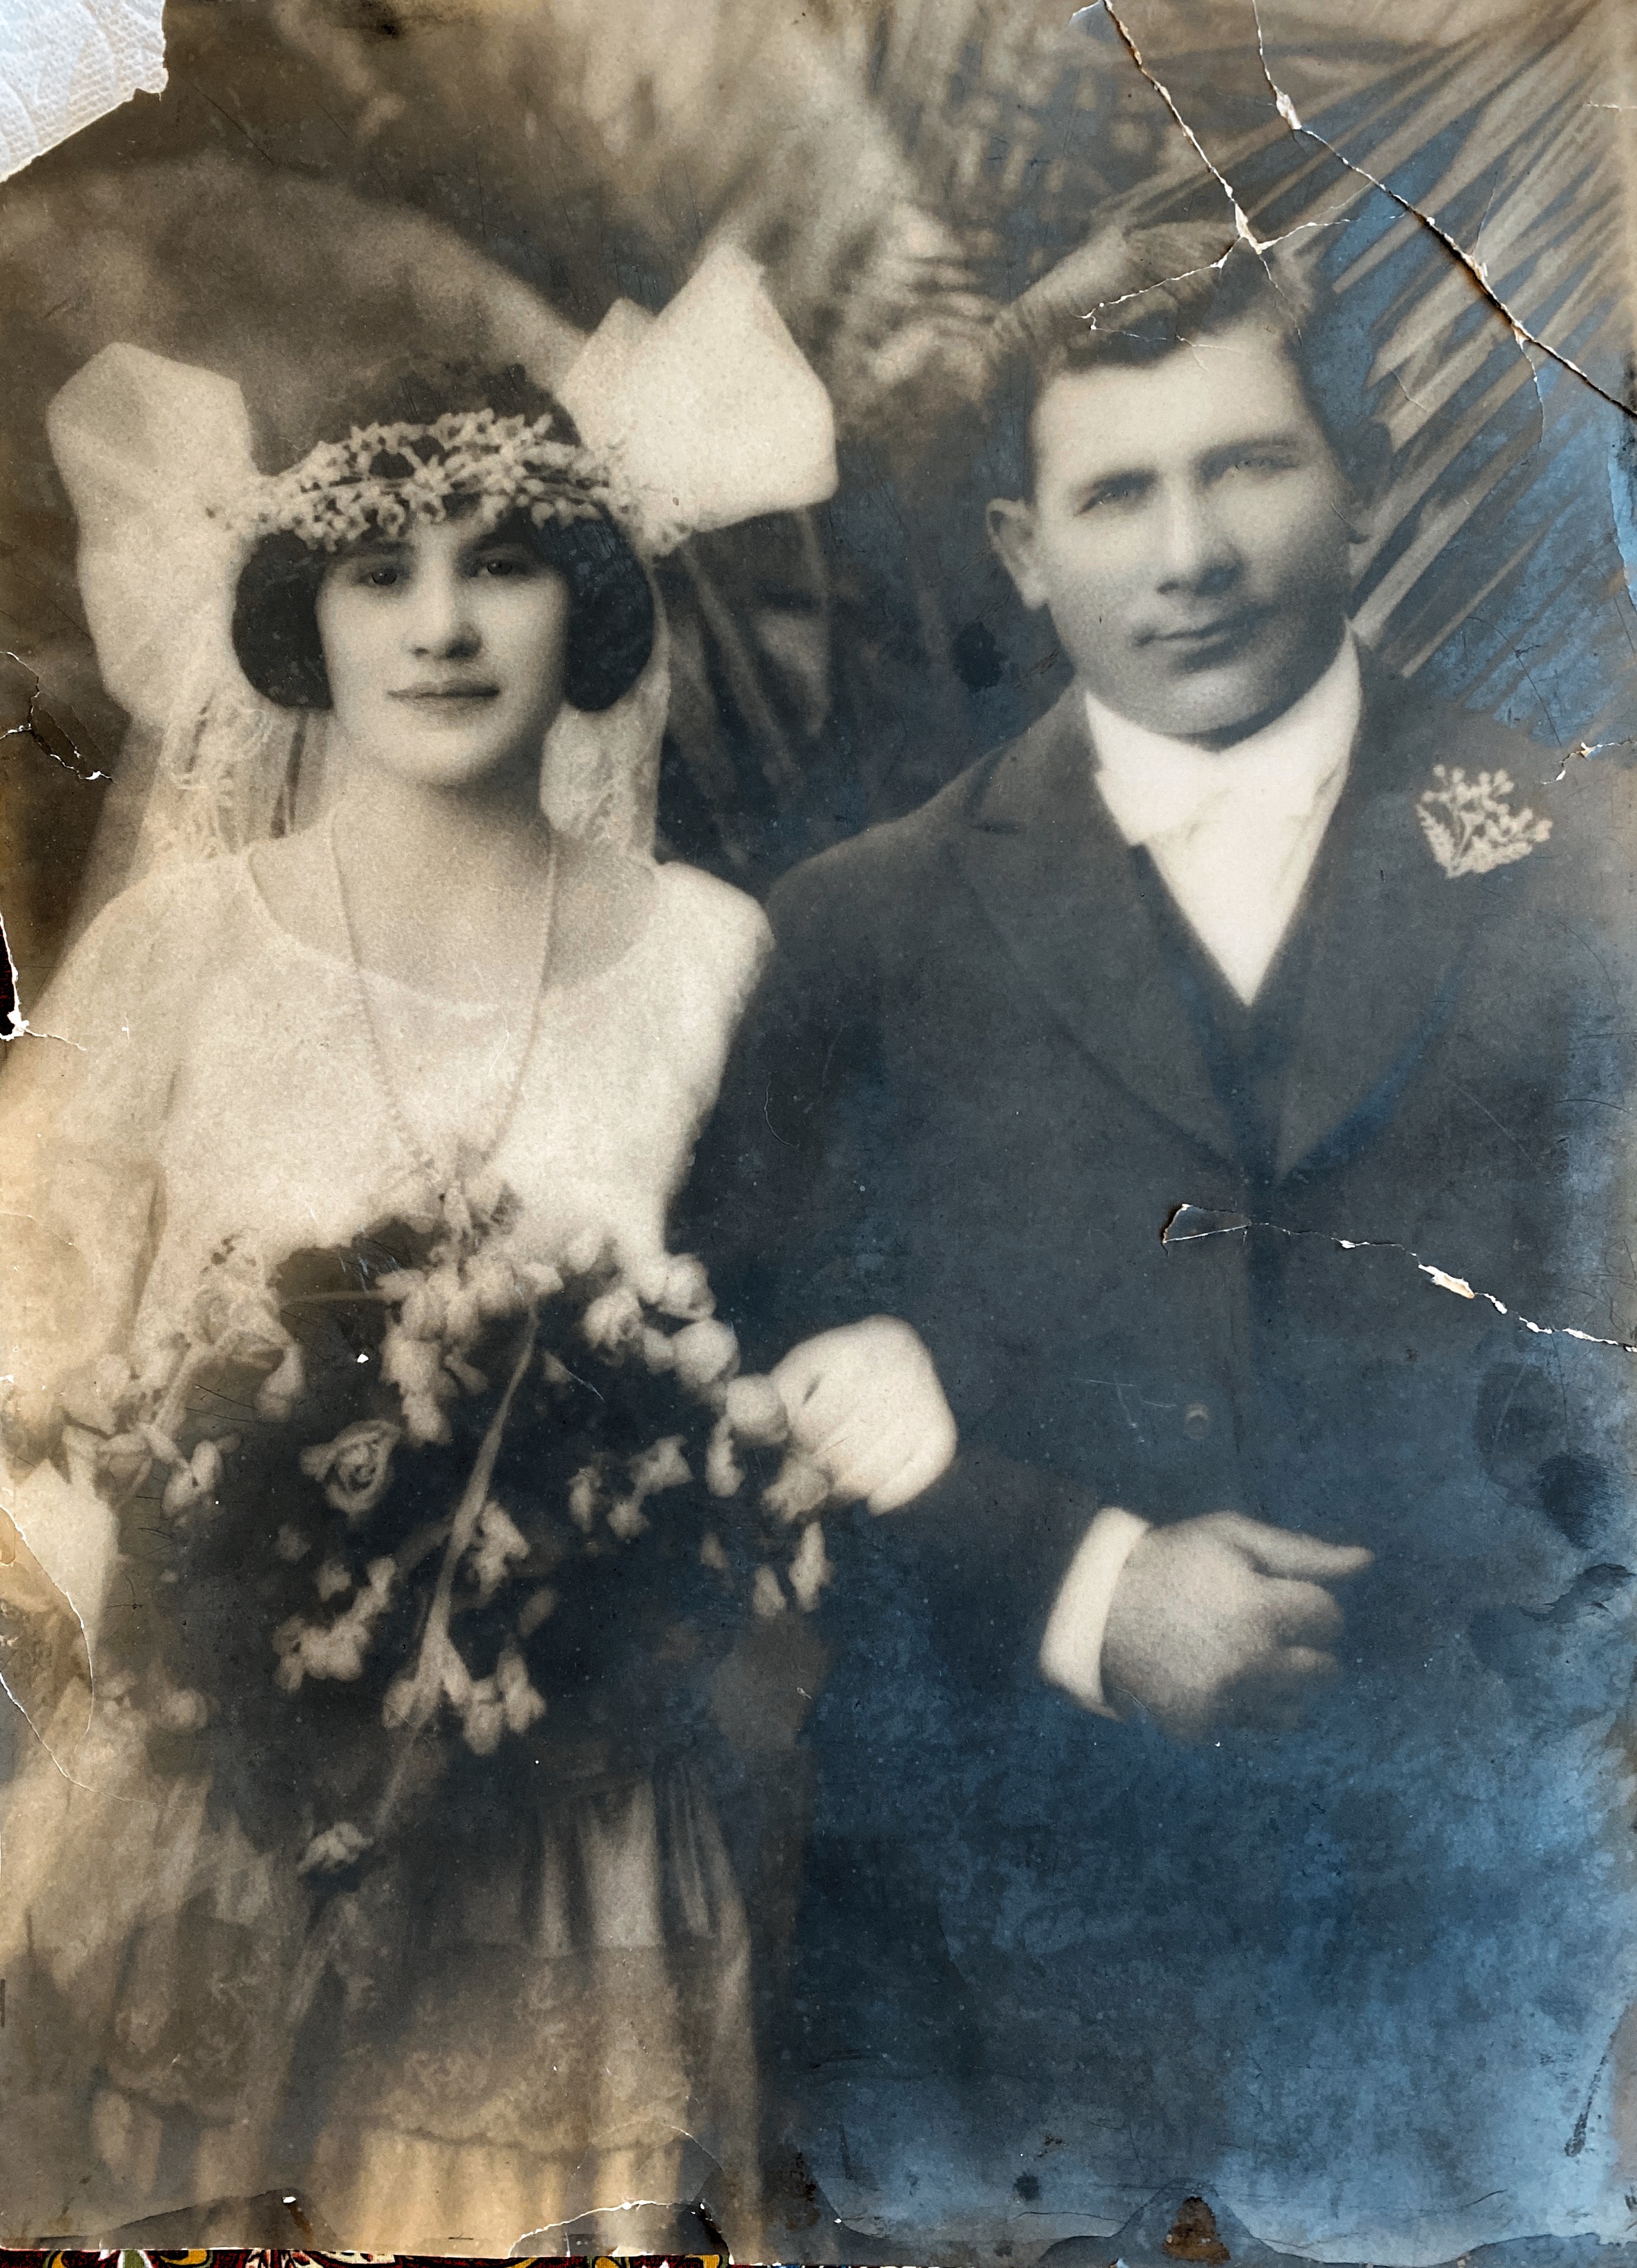 Angela Lena Morris the Daughter of  Maria (Georgouses) and John Morris on her wedding day to George N. Galanis   
Angela dob 3/14/1903 to 12/10/1968 
George dob 3/28/1888 to 12/17/1965